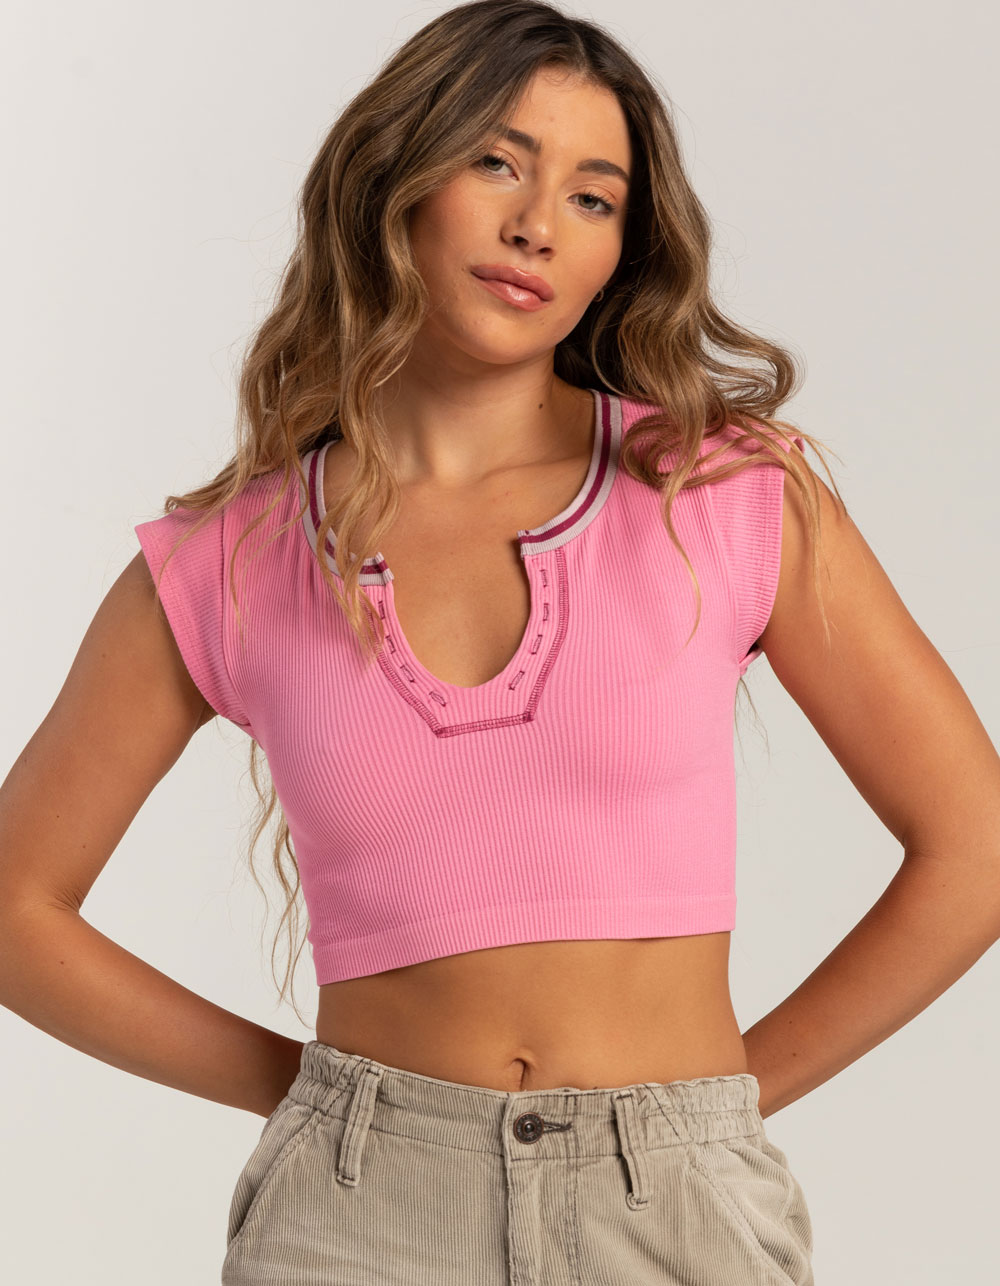 BDG Urban Outfitters Seamless Go For Gold Womens Crop Top - NEON HOT PINK